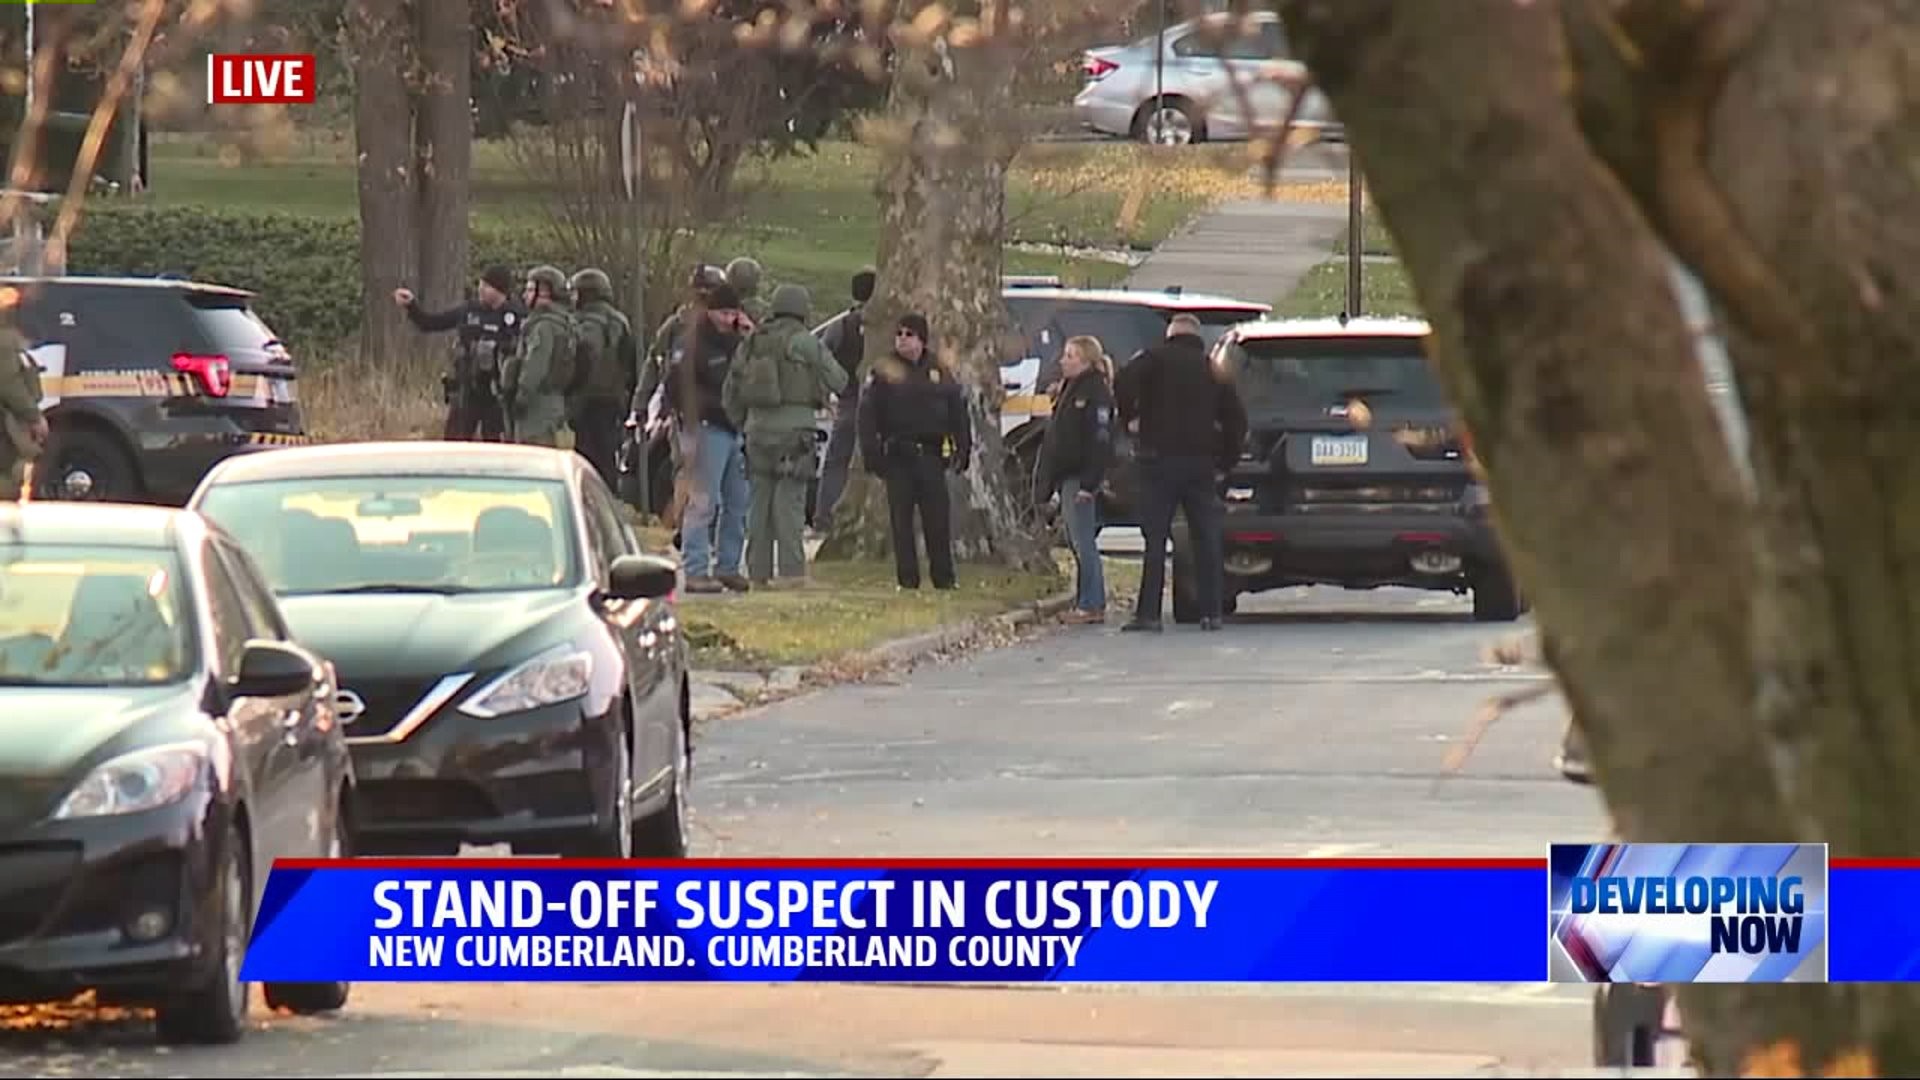 Gunman in police custody after hours long in New Cumberland